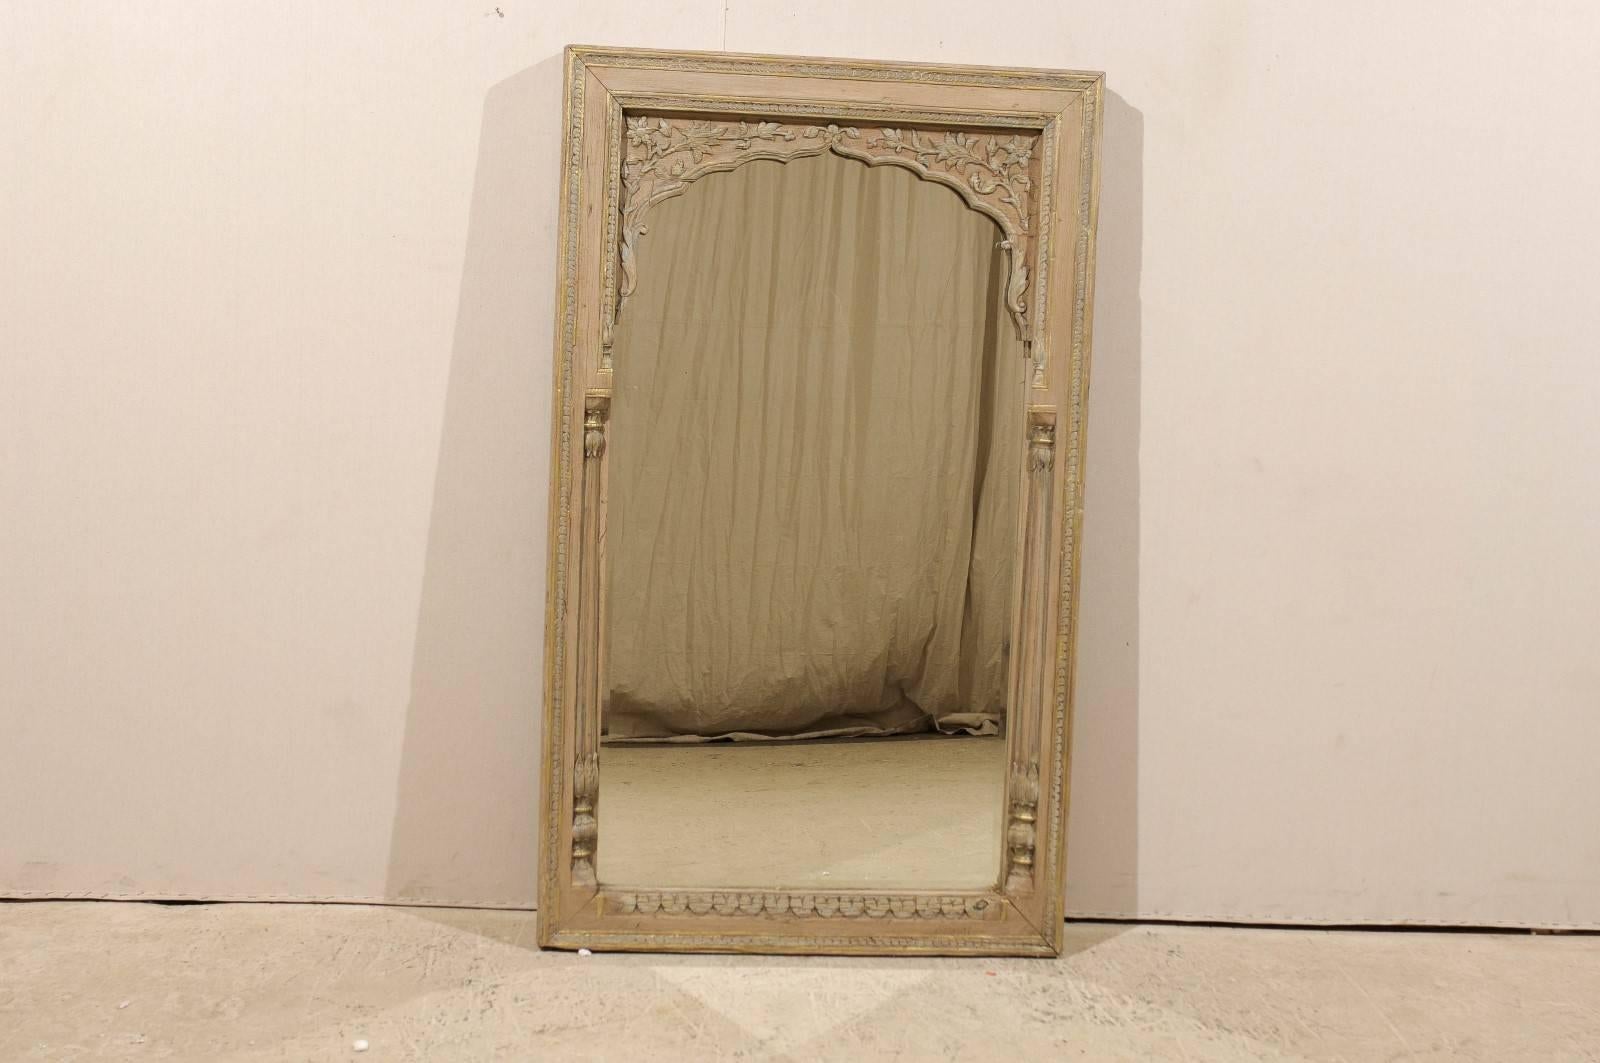 A vintage British Colonial style mirror. This mirror features a natural color carved wood surround with light grey and gold painted details throughout. The carvings feature pretty floral motifs. The sides of the mirror are flanked with carved thin